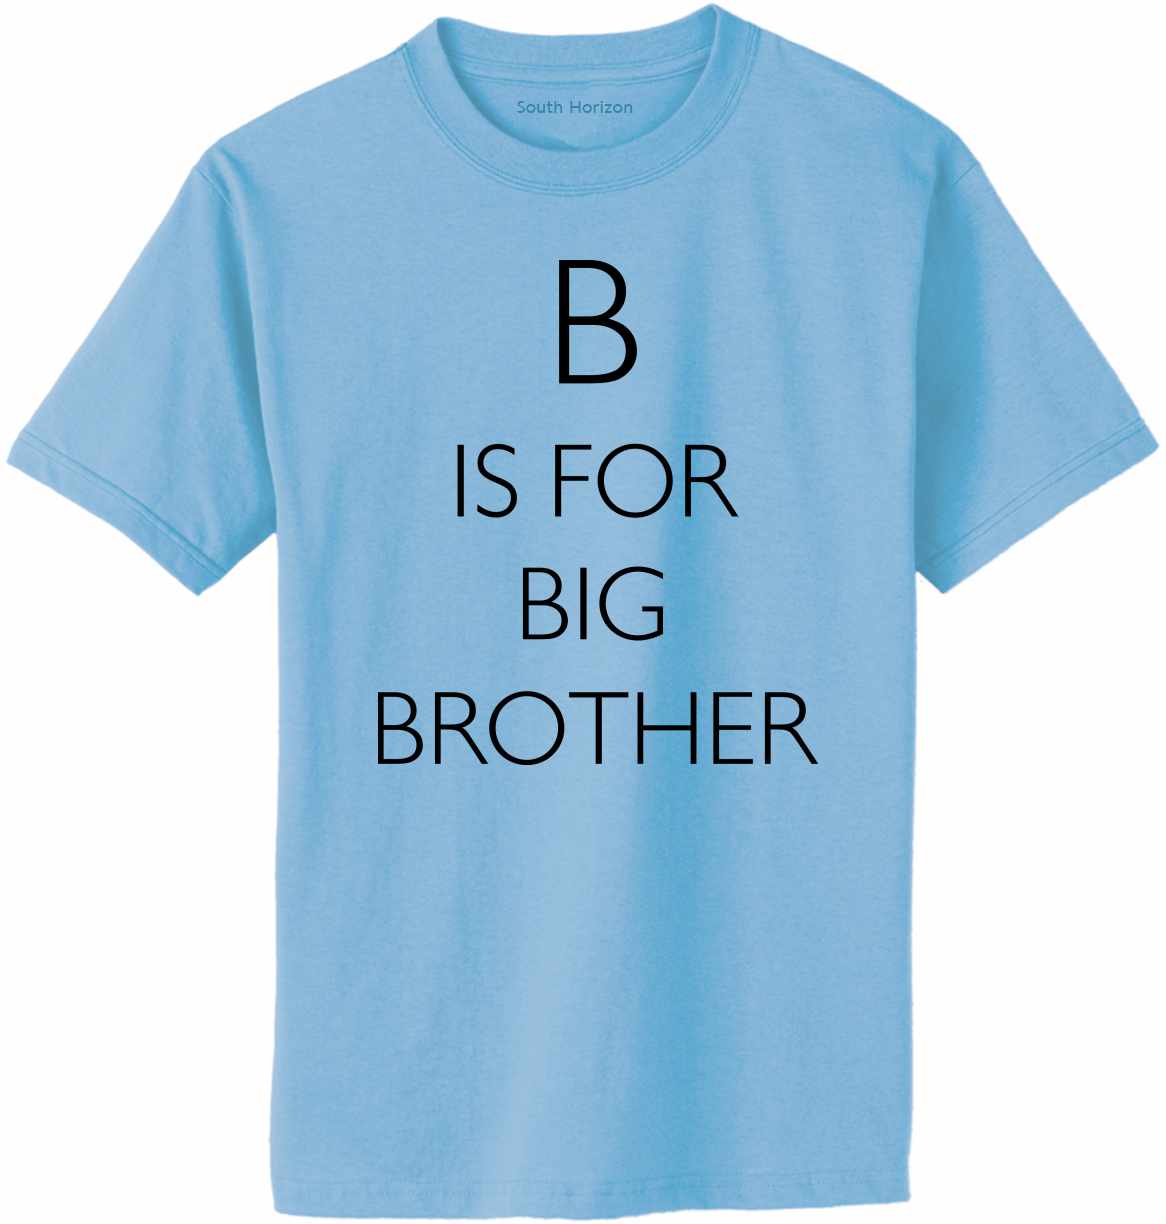 B is for Big Brother Adult T-Shirt